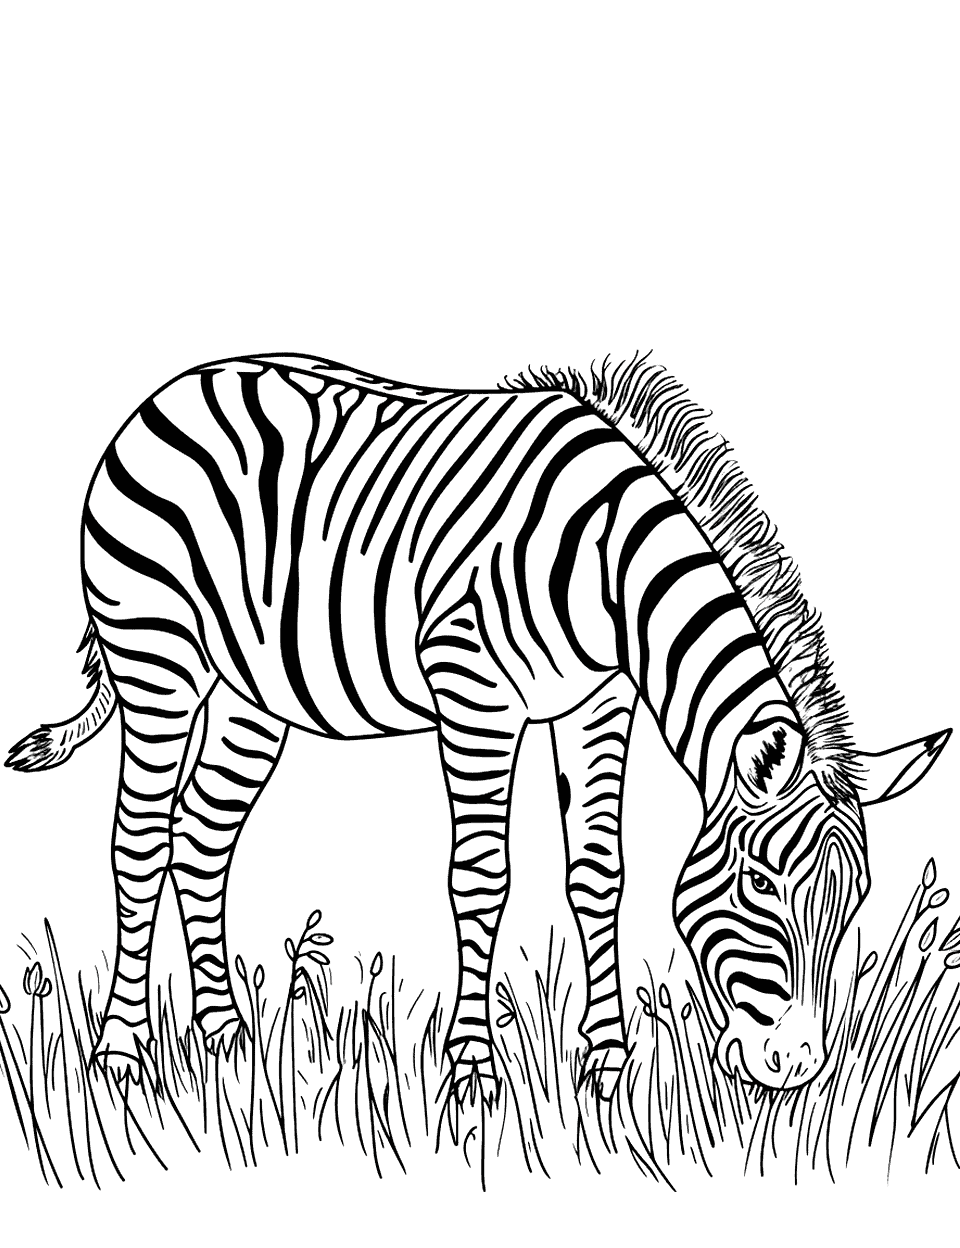 Zebra Grazing in the Meadow Coloring Page - A peaceful zebra eating grass in a lush meadow.